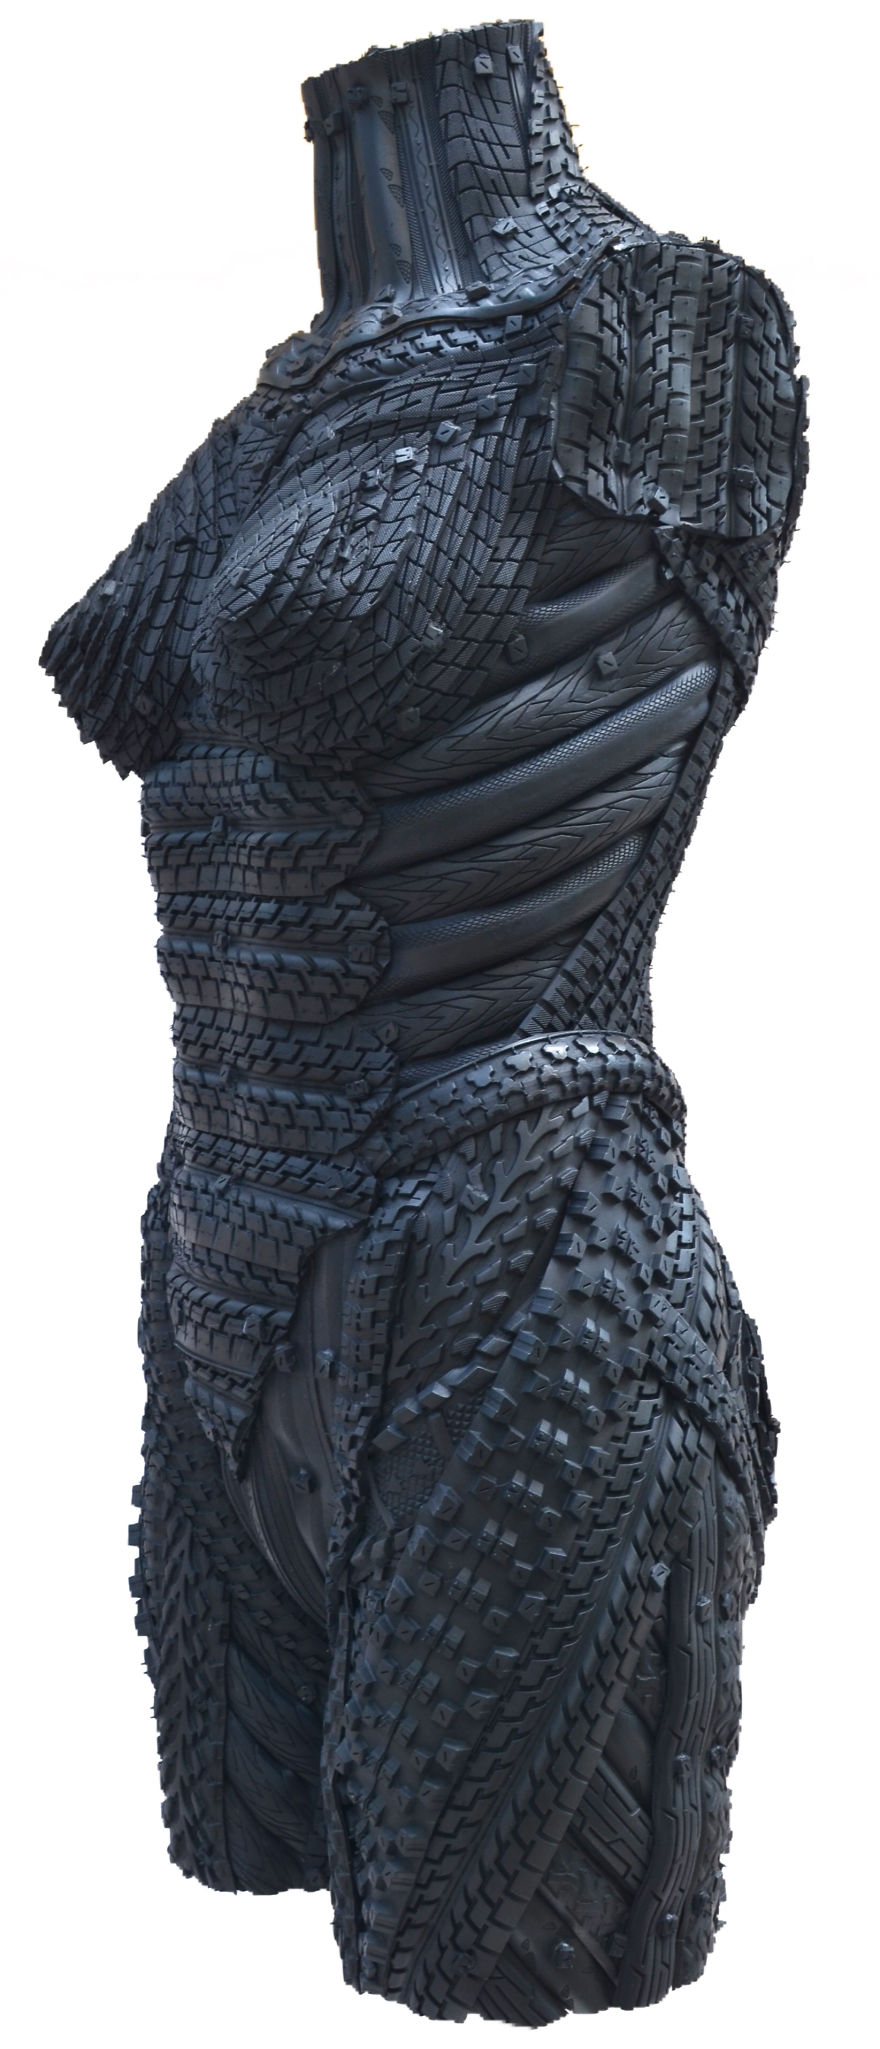 Recycled Tire Sculpture Of Female Torso